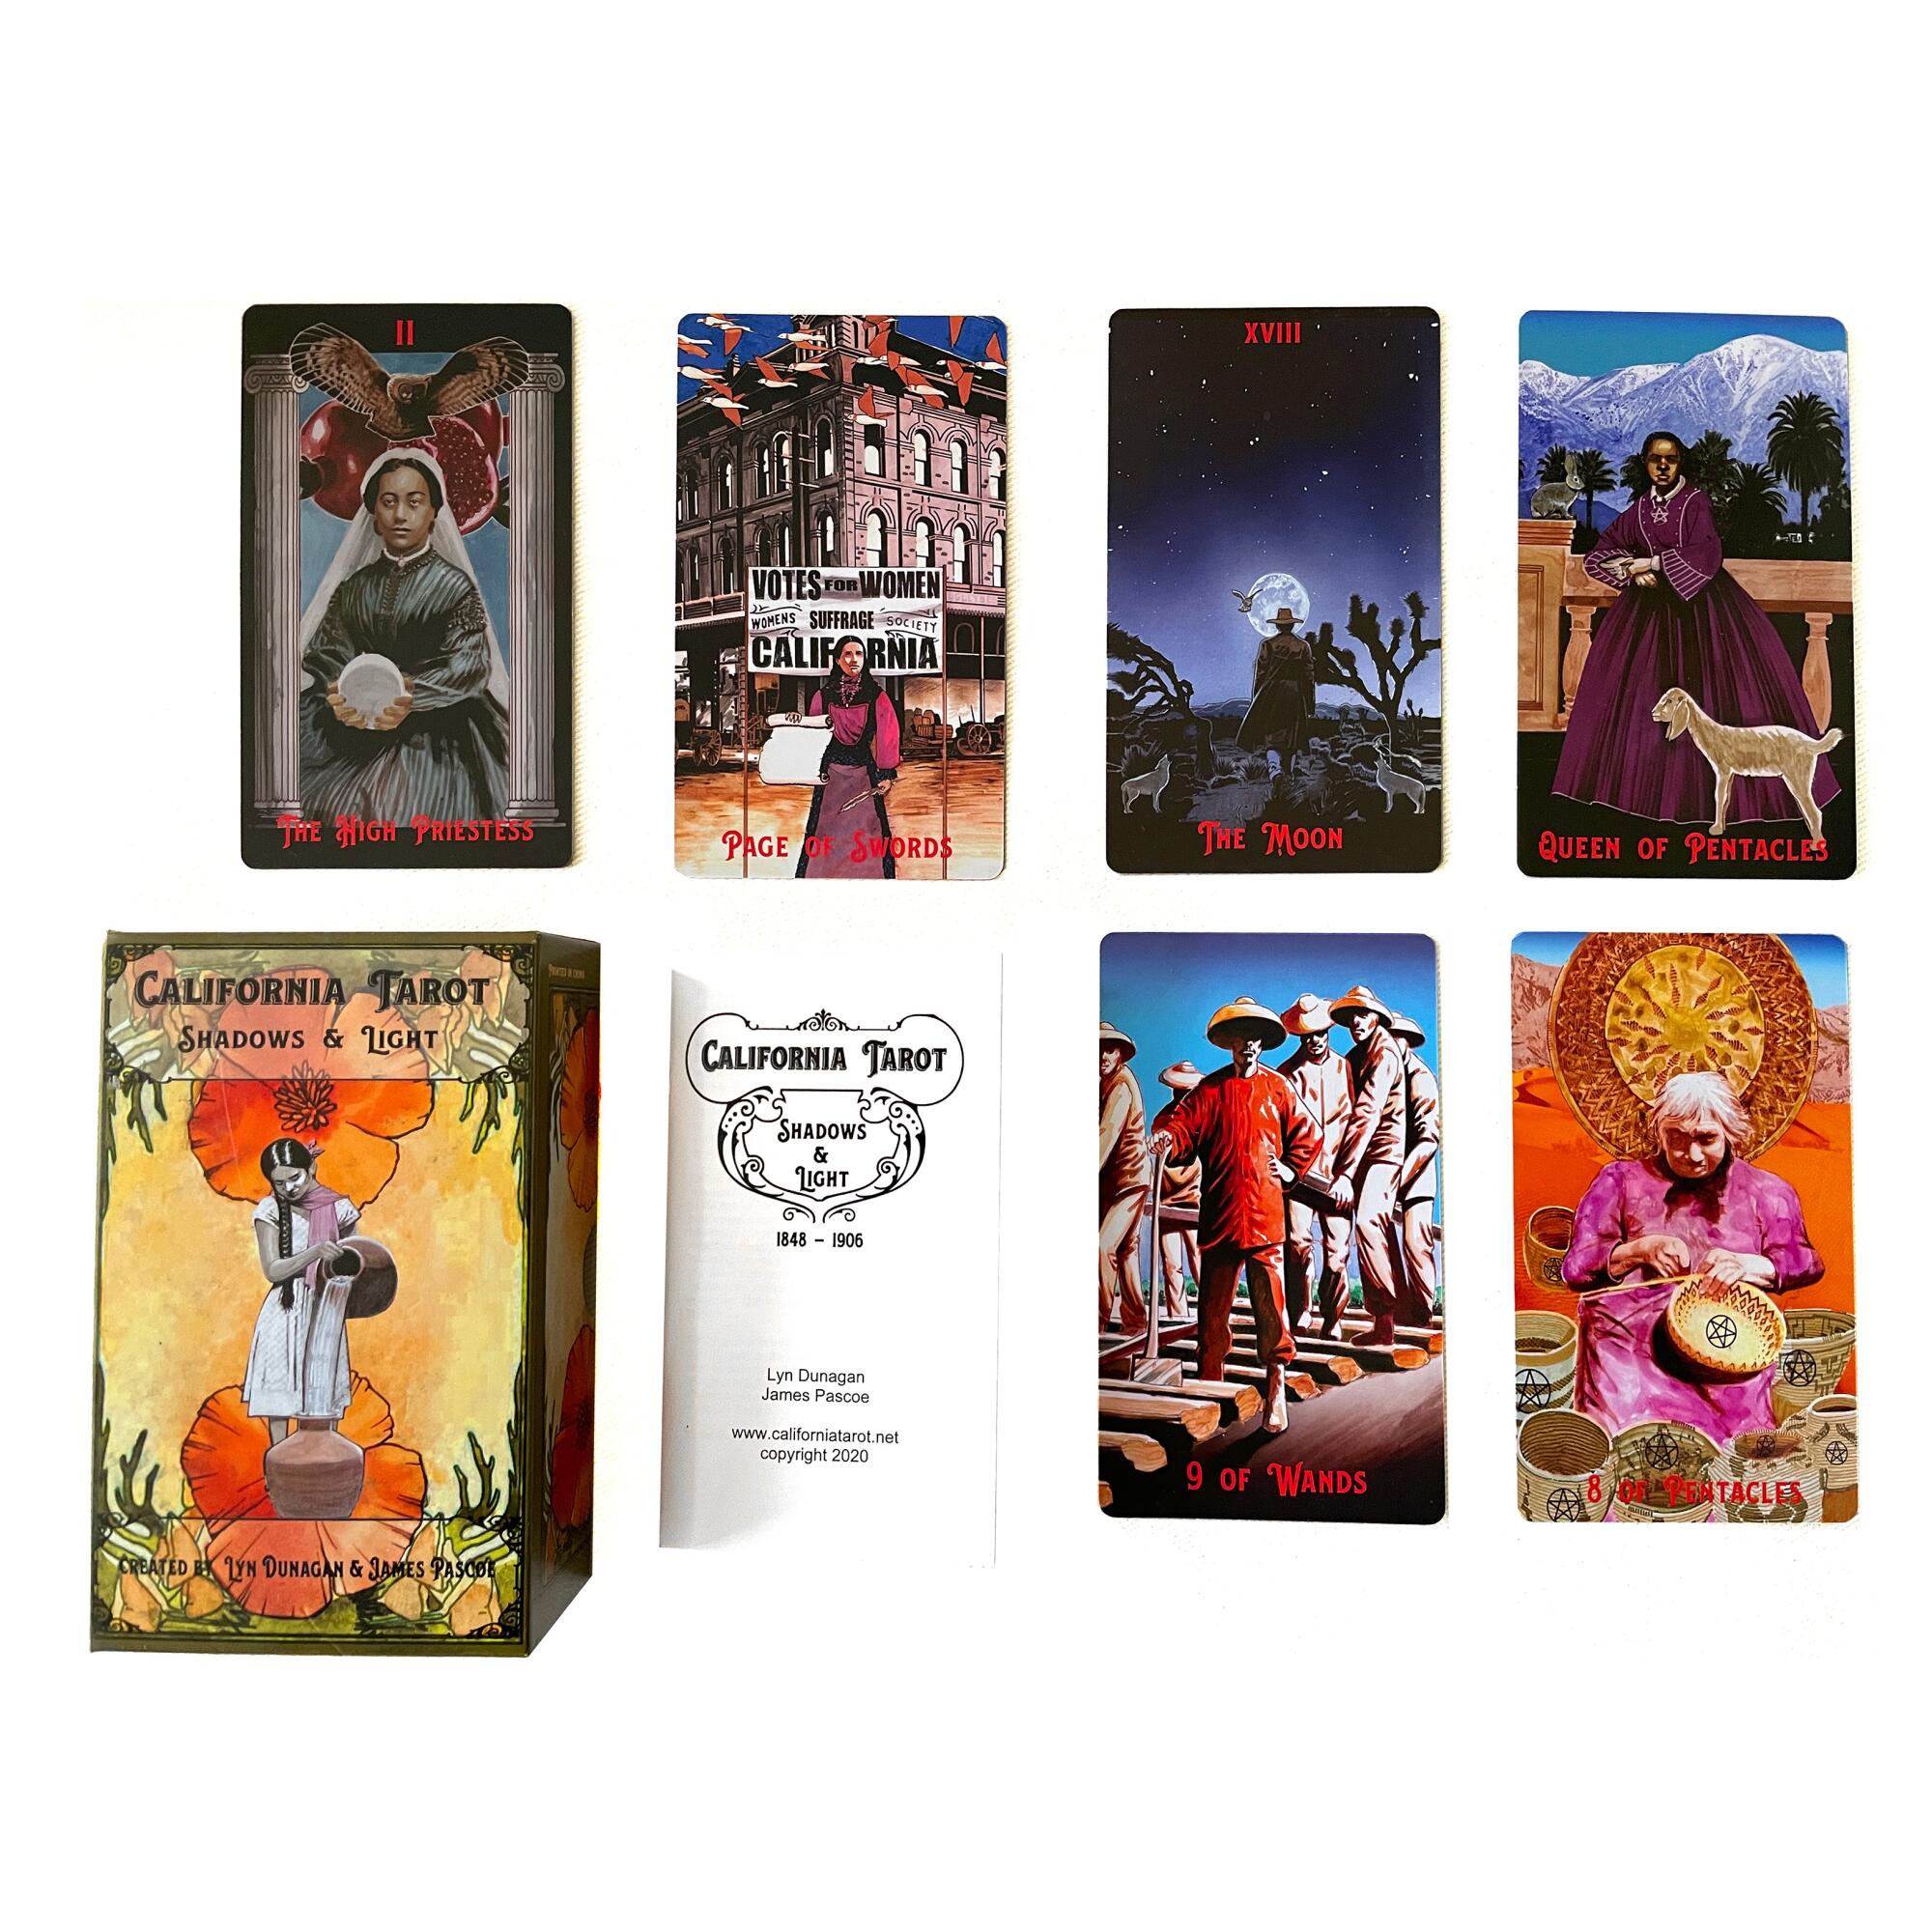 A deck of tarot cards with California-themed images.